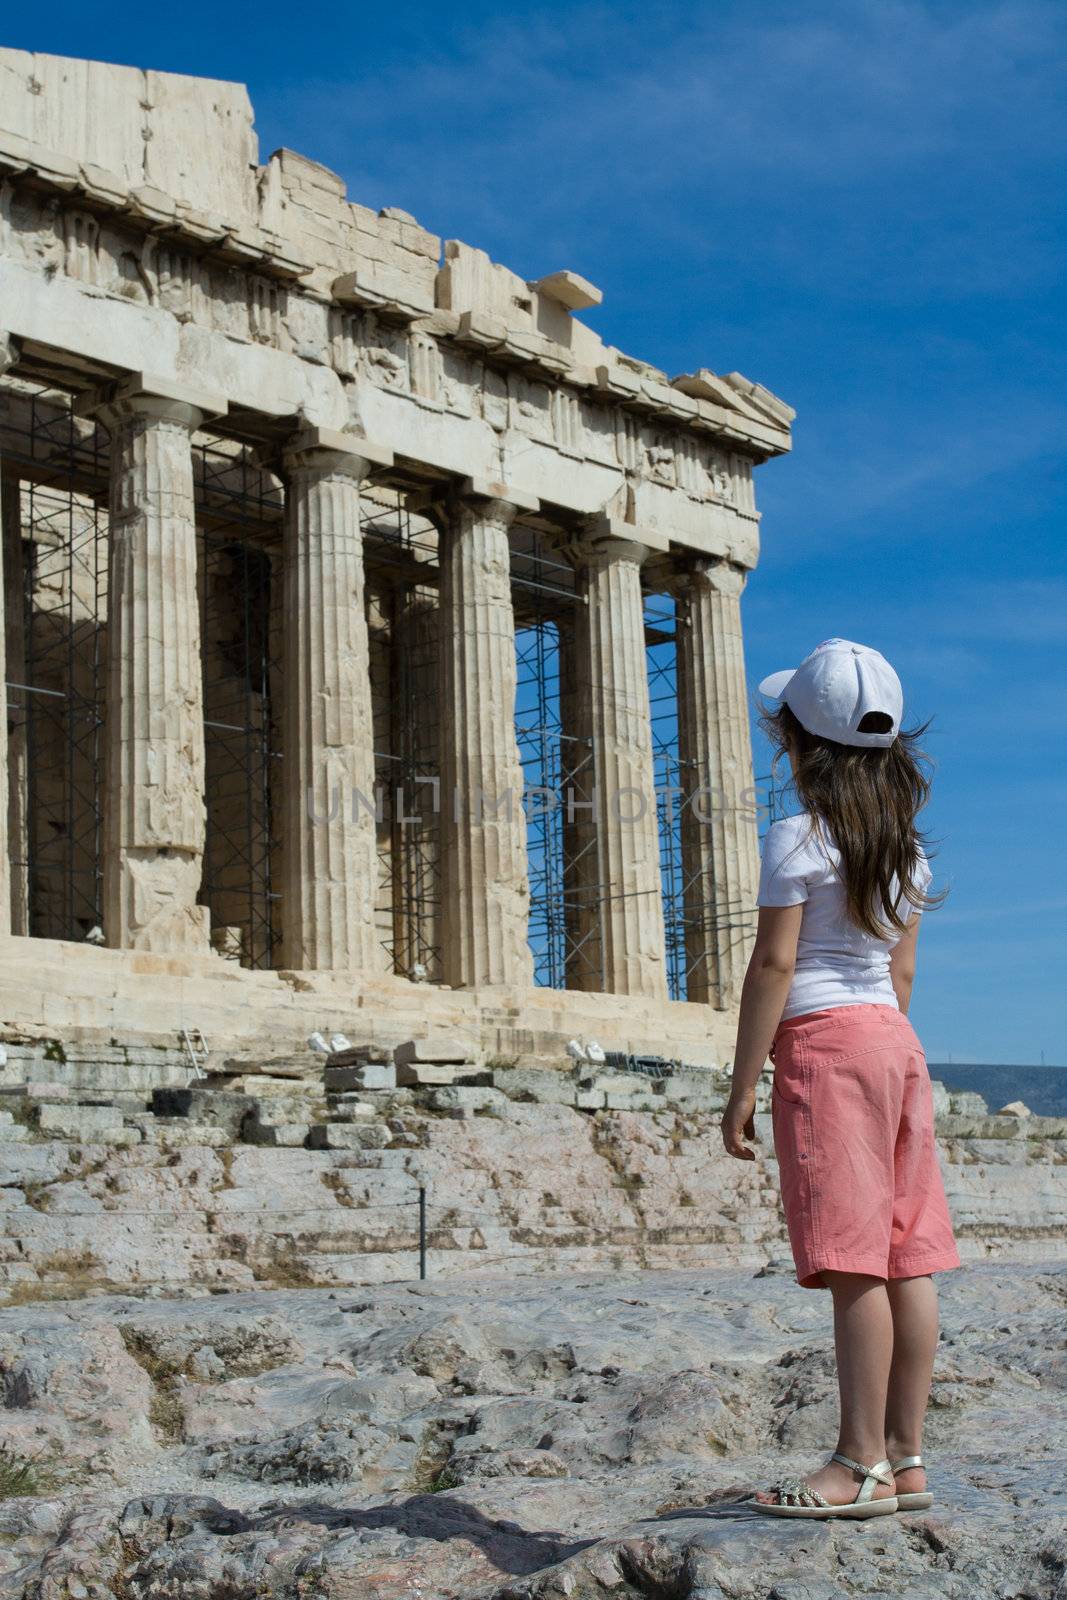 Child in front of Facade of ancient temple Parthenon in Acropolis Athens Greece on the blue sky background